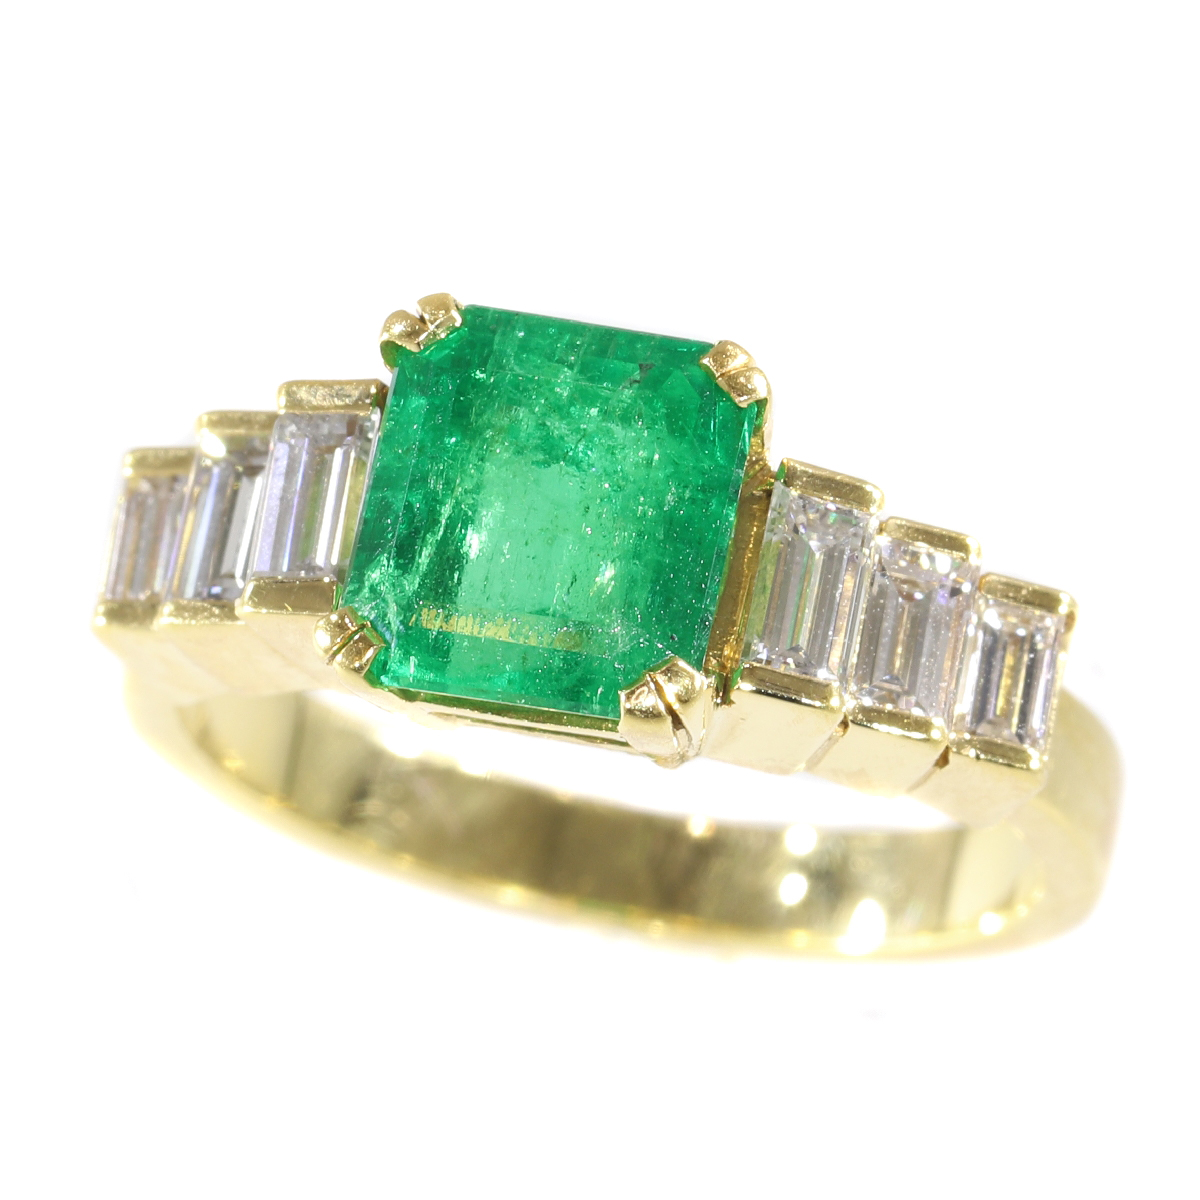 Vintage French estate ring with high quality Colombian emerald and baguette diamonds